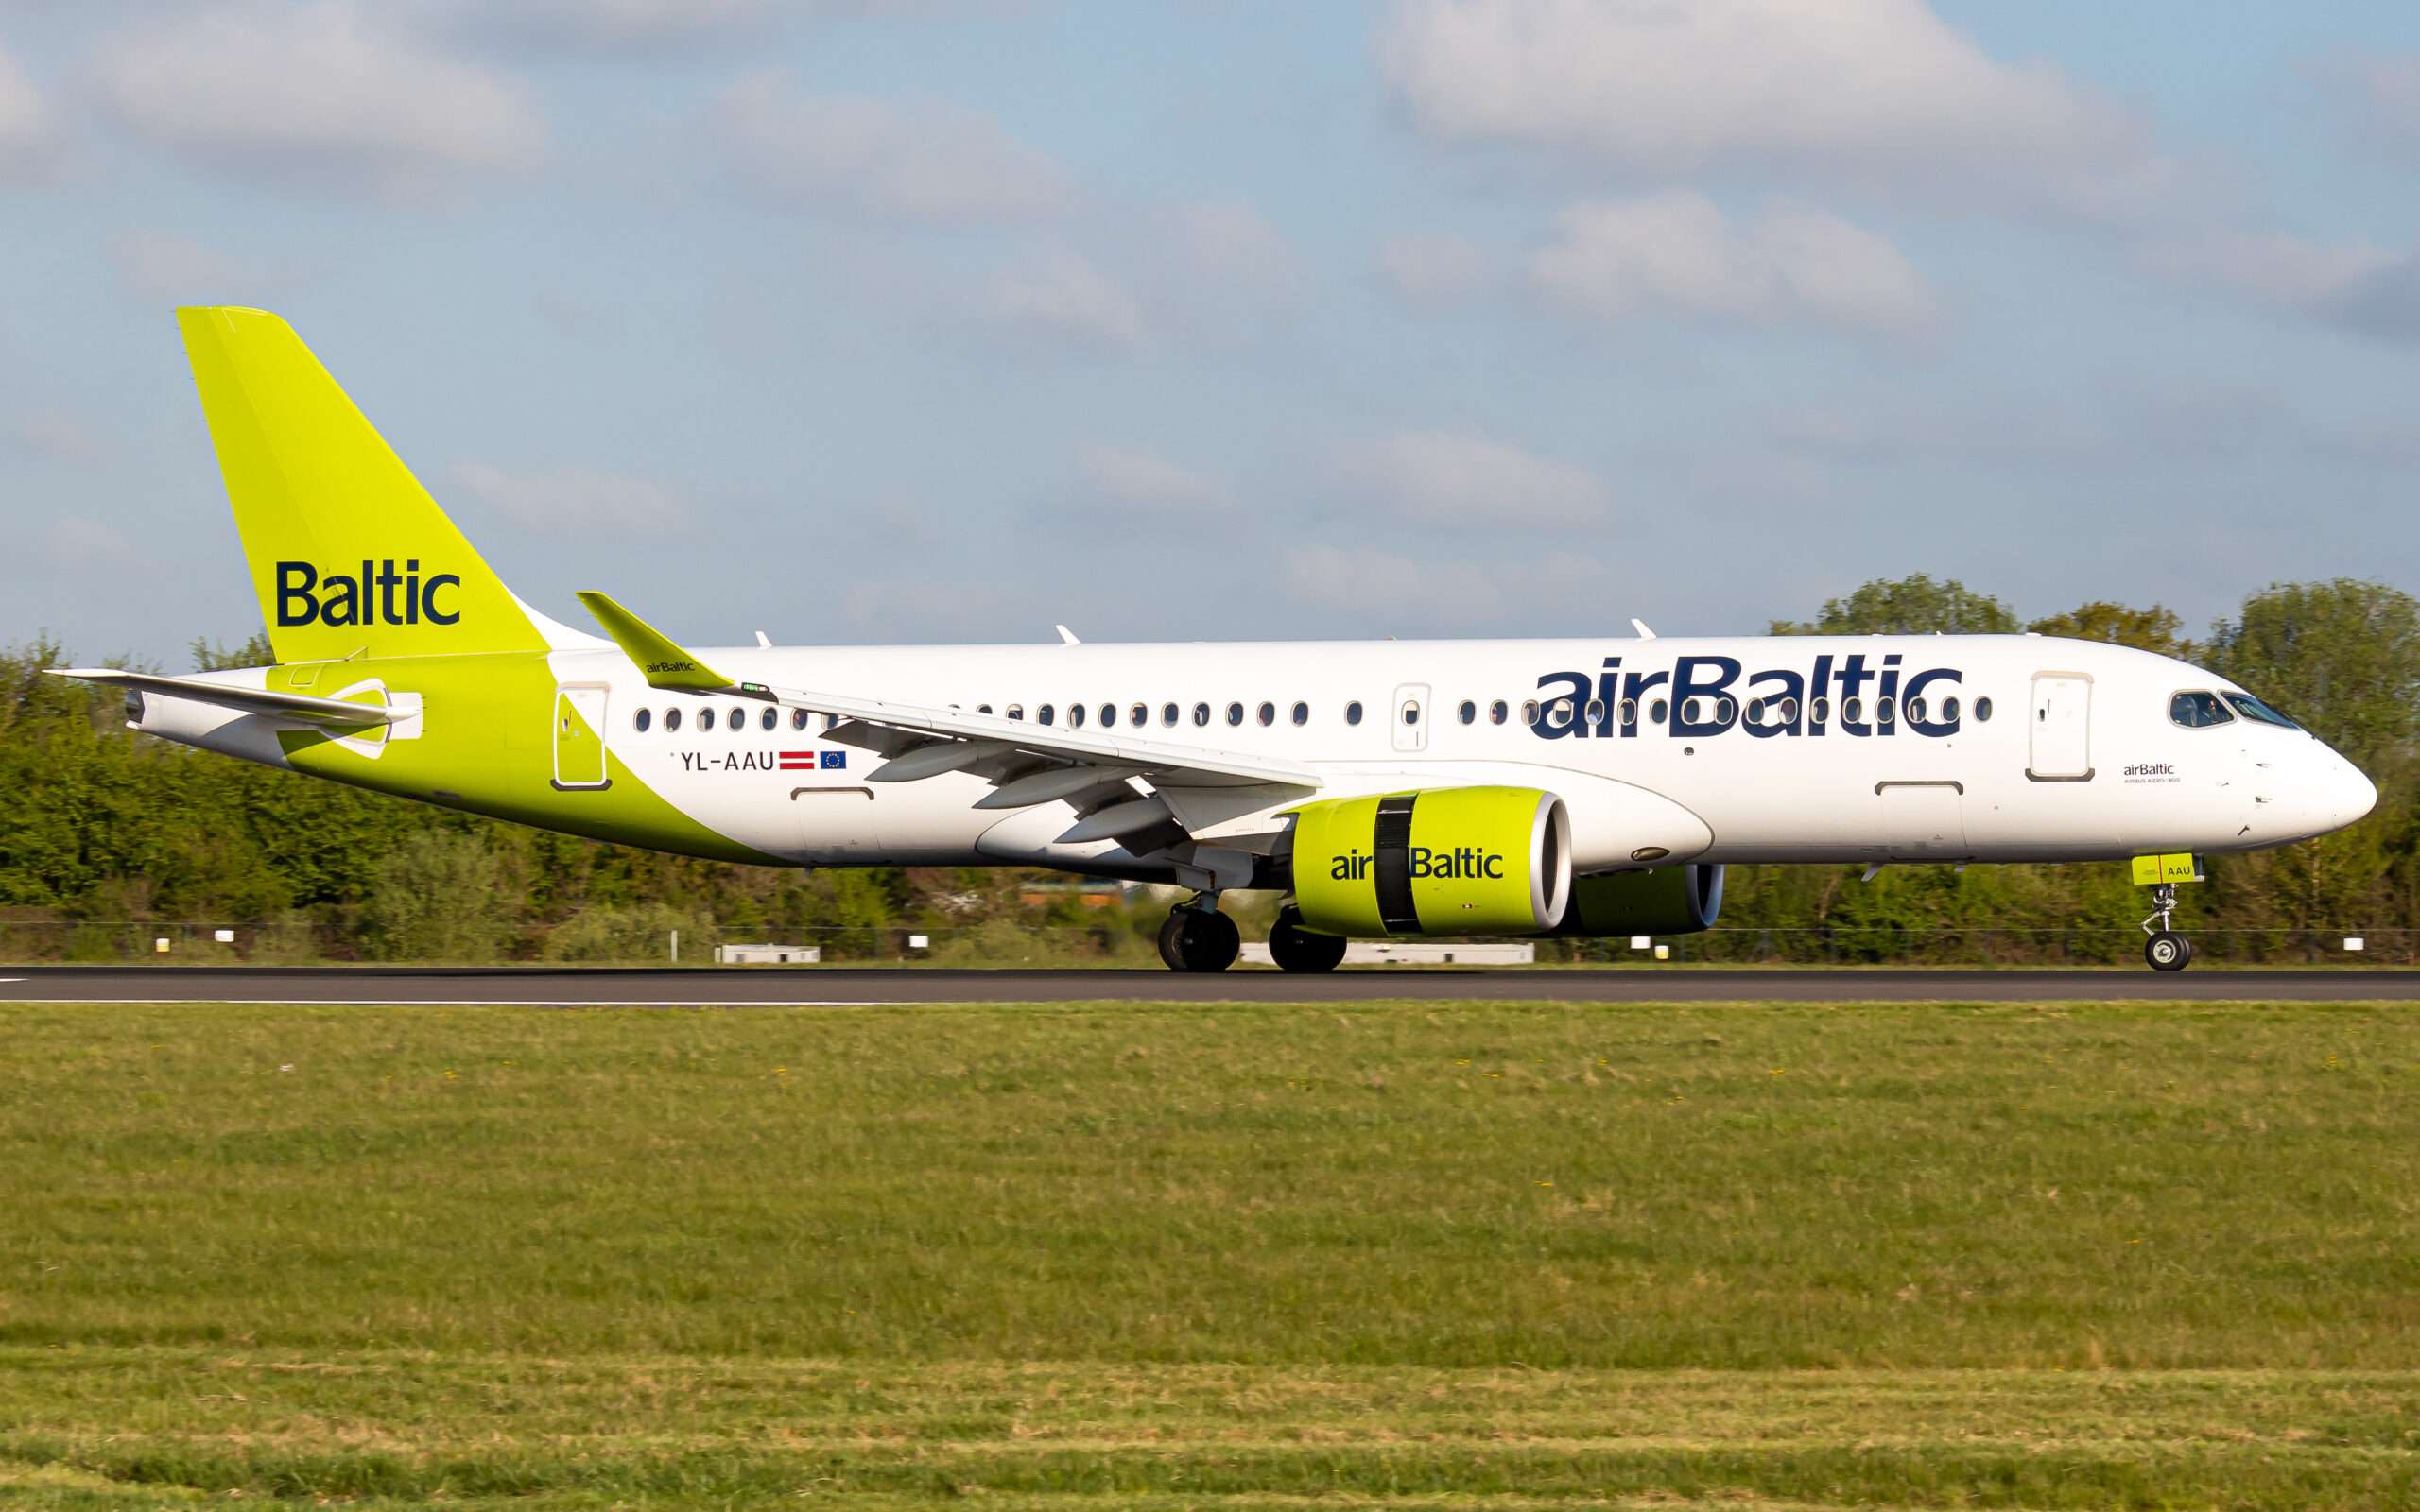 airBaltic Grows Tallinn Operations, Benefits Estonia Strongly